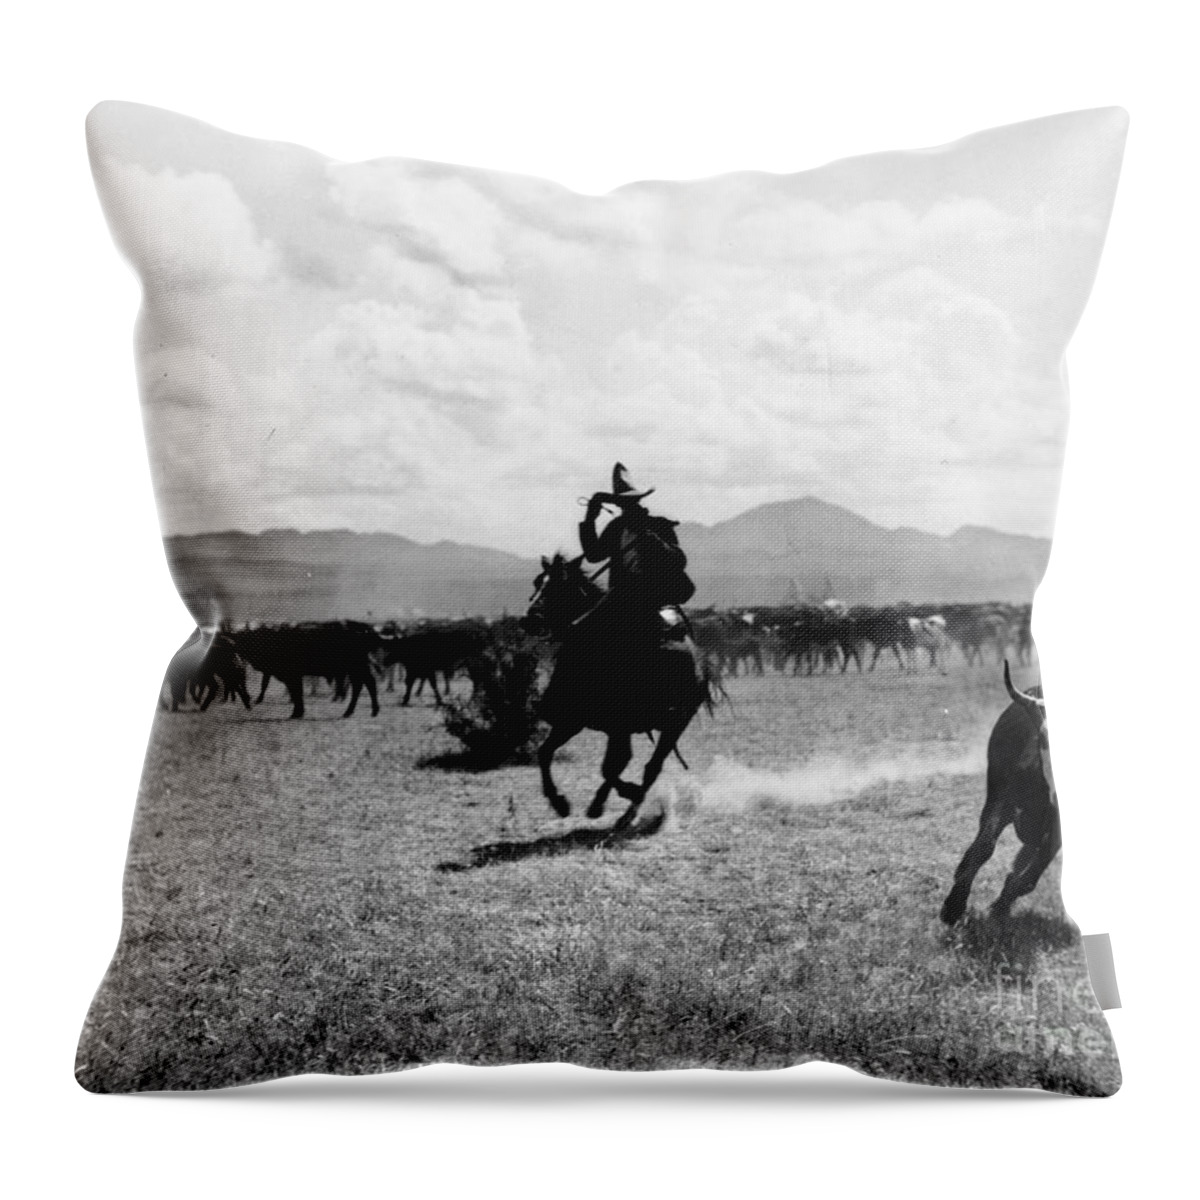 Raguero Cutting Out A Cow From The Herd Throw Pillow featuring the photograph Raguero cutting out a cow from the herd by Raguero cutting out a cow from the herd